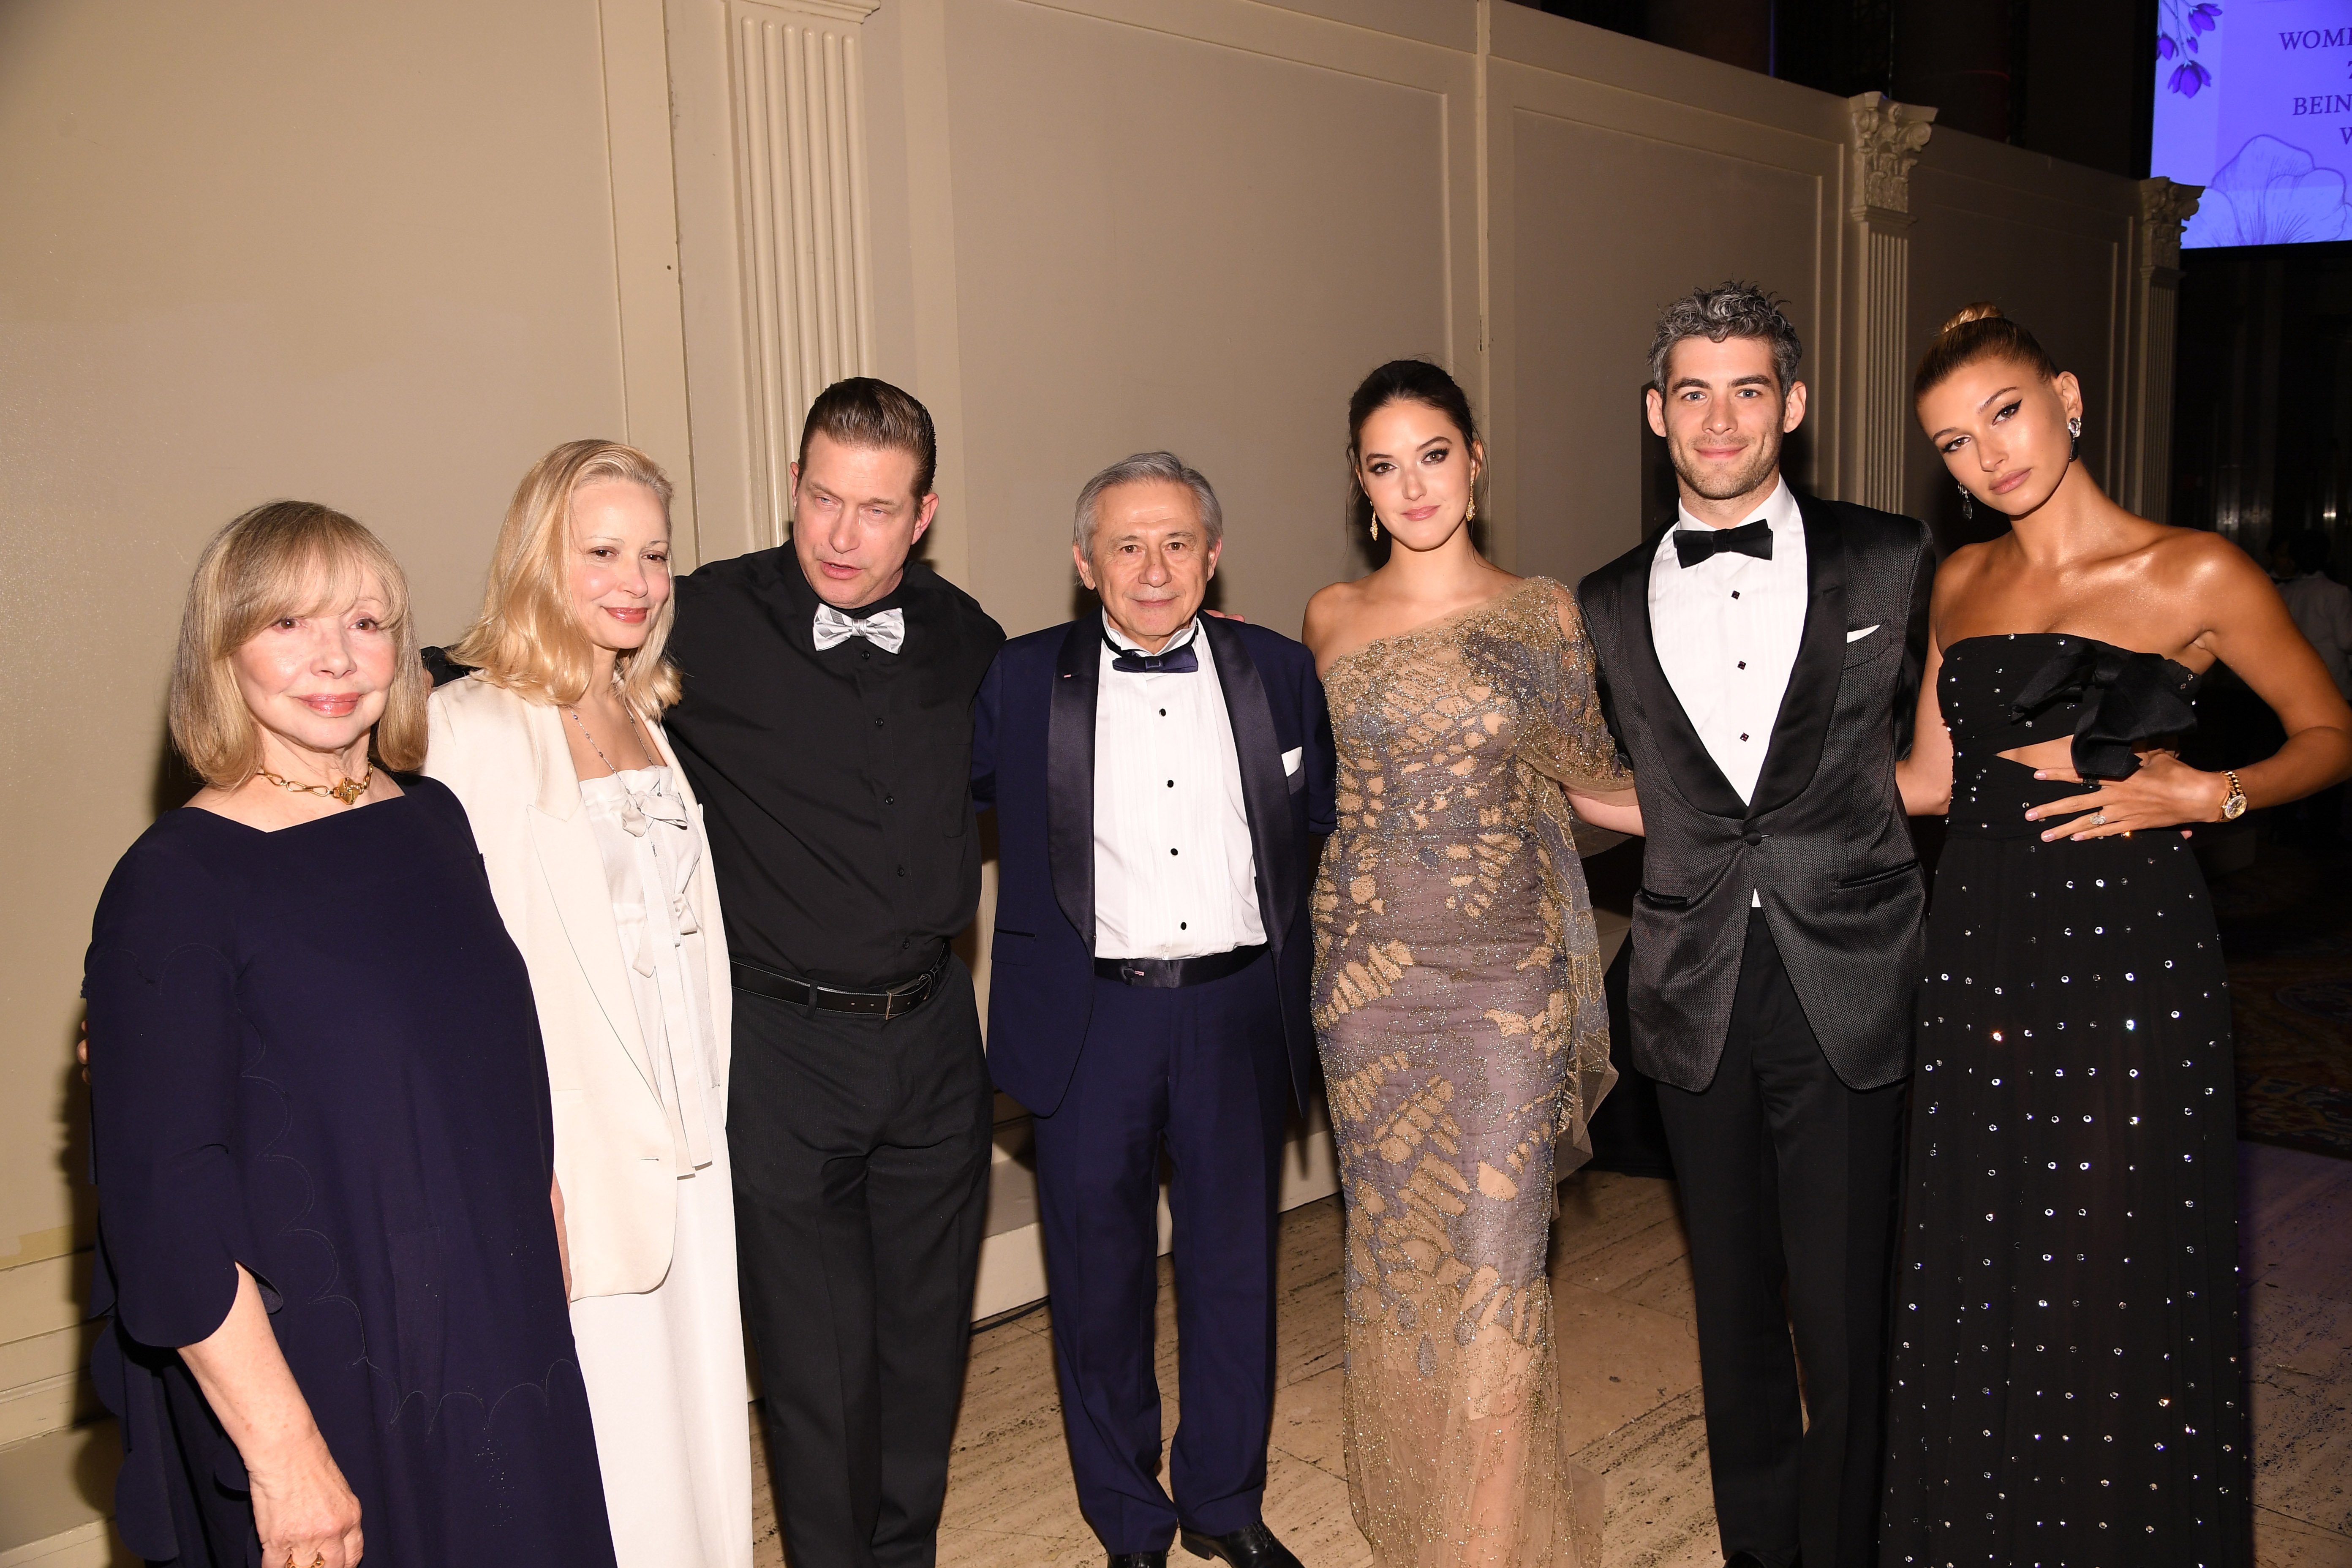 Ruth Almeida, Kennya Baldwin, Stephen Baldwin, Tamer Seckin MD, Alaia Baldwin, Andrew Aronow and Hailey Bieber attend Endometriosis Foundation Of America's 10th Annual Blossom Ball on May 08, 2019, at Cipriani Wall Street in New York City. | Source: Getty Images